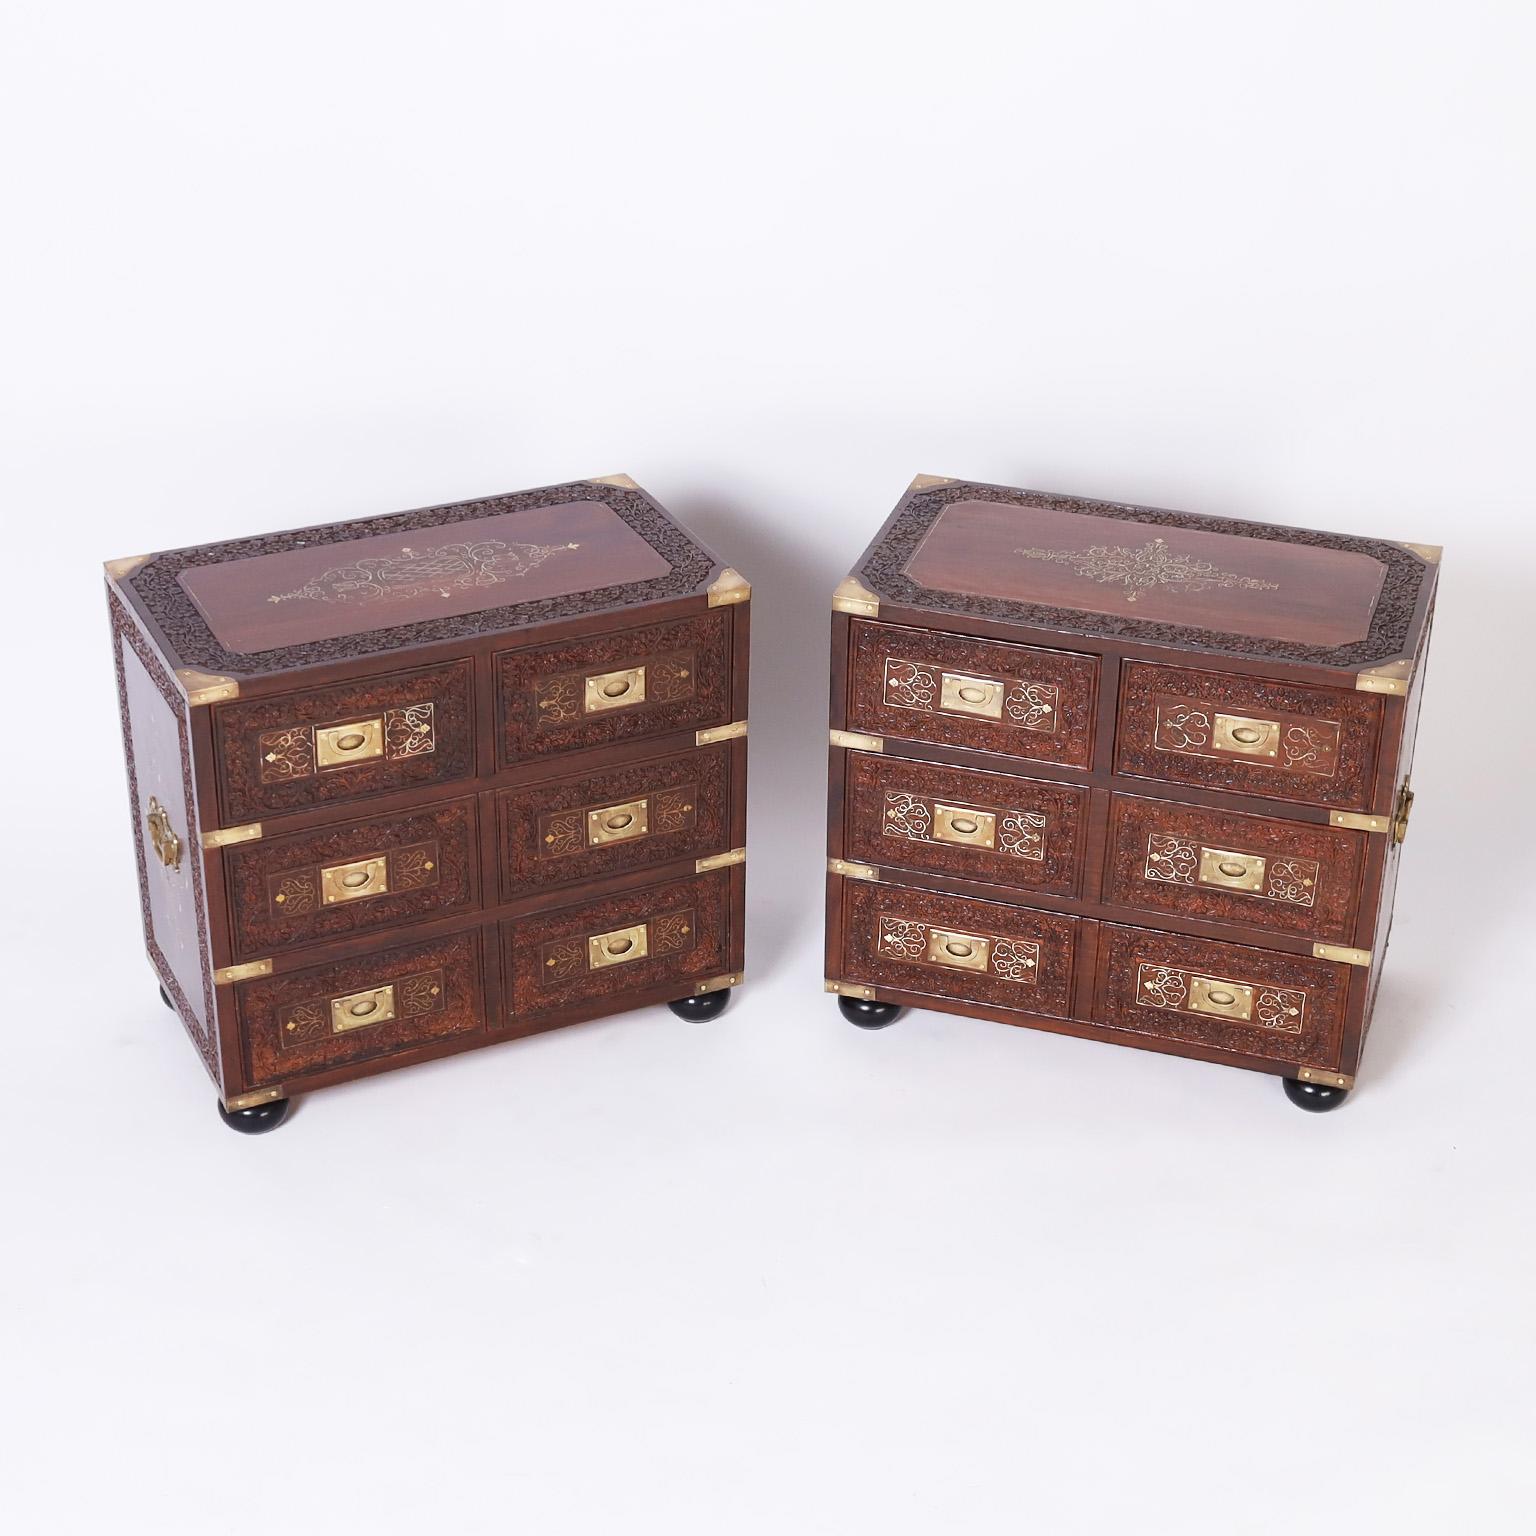 Anglo-Indian Pair of Rosewood Carved and Inlaid Stands